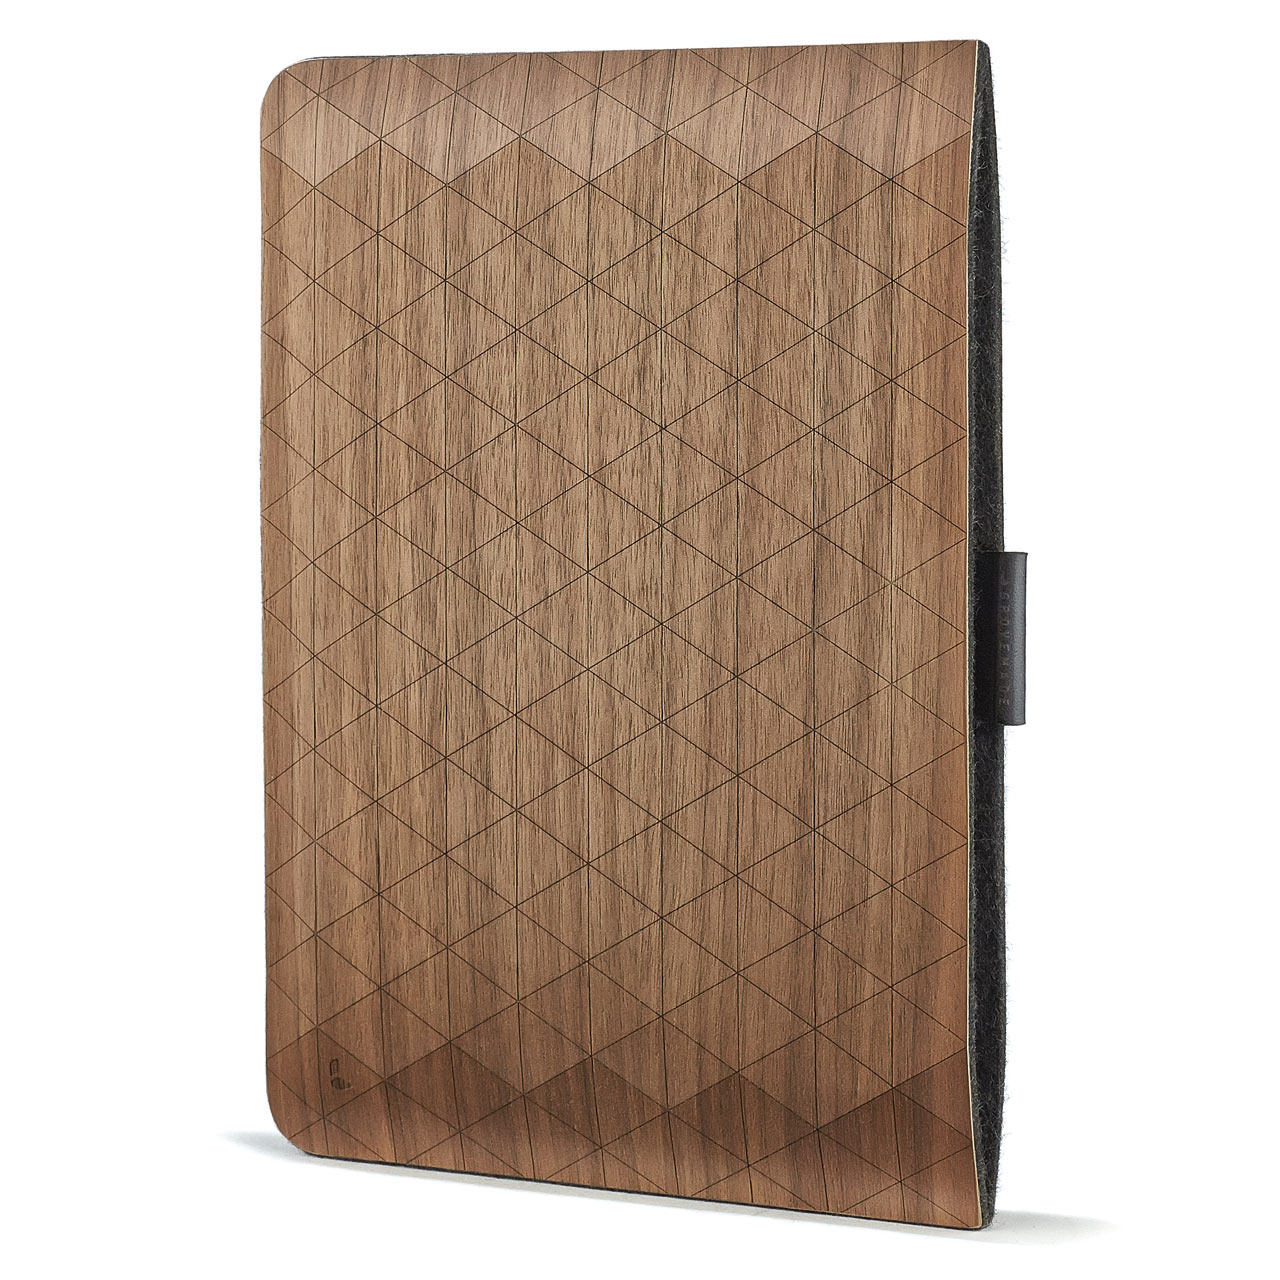 Geometric Wooden iPad and Macbook Sleeves from Grove